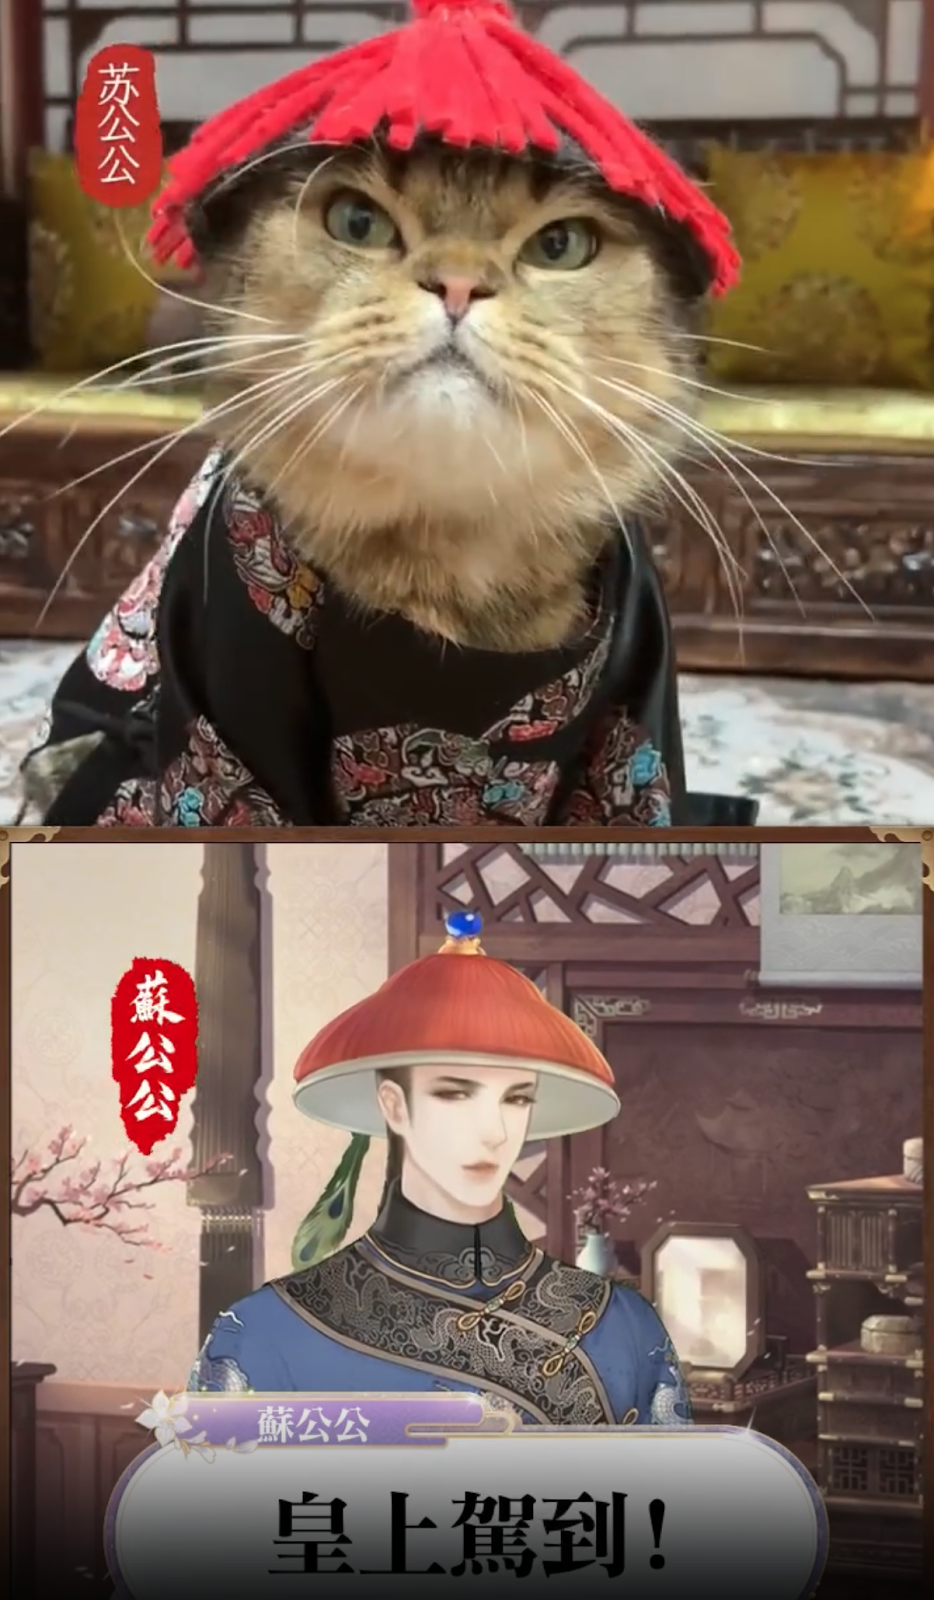 A cat wearing a kimono and a picture of a person

Description automatically generated